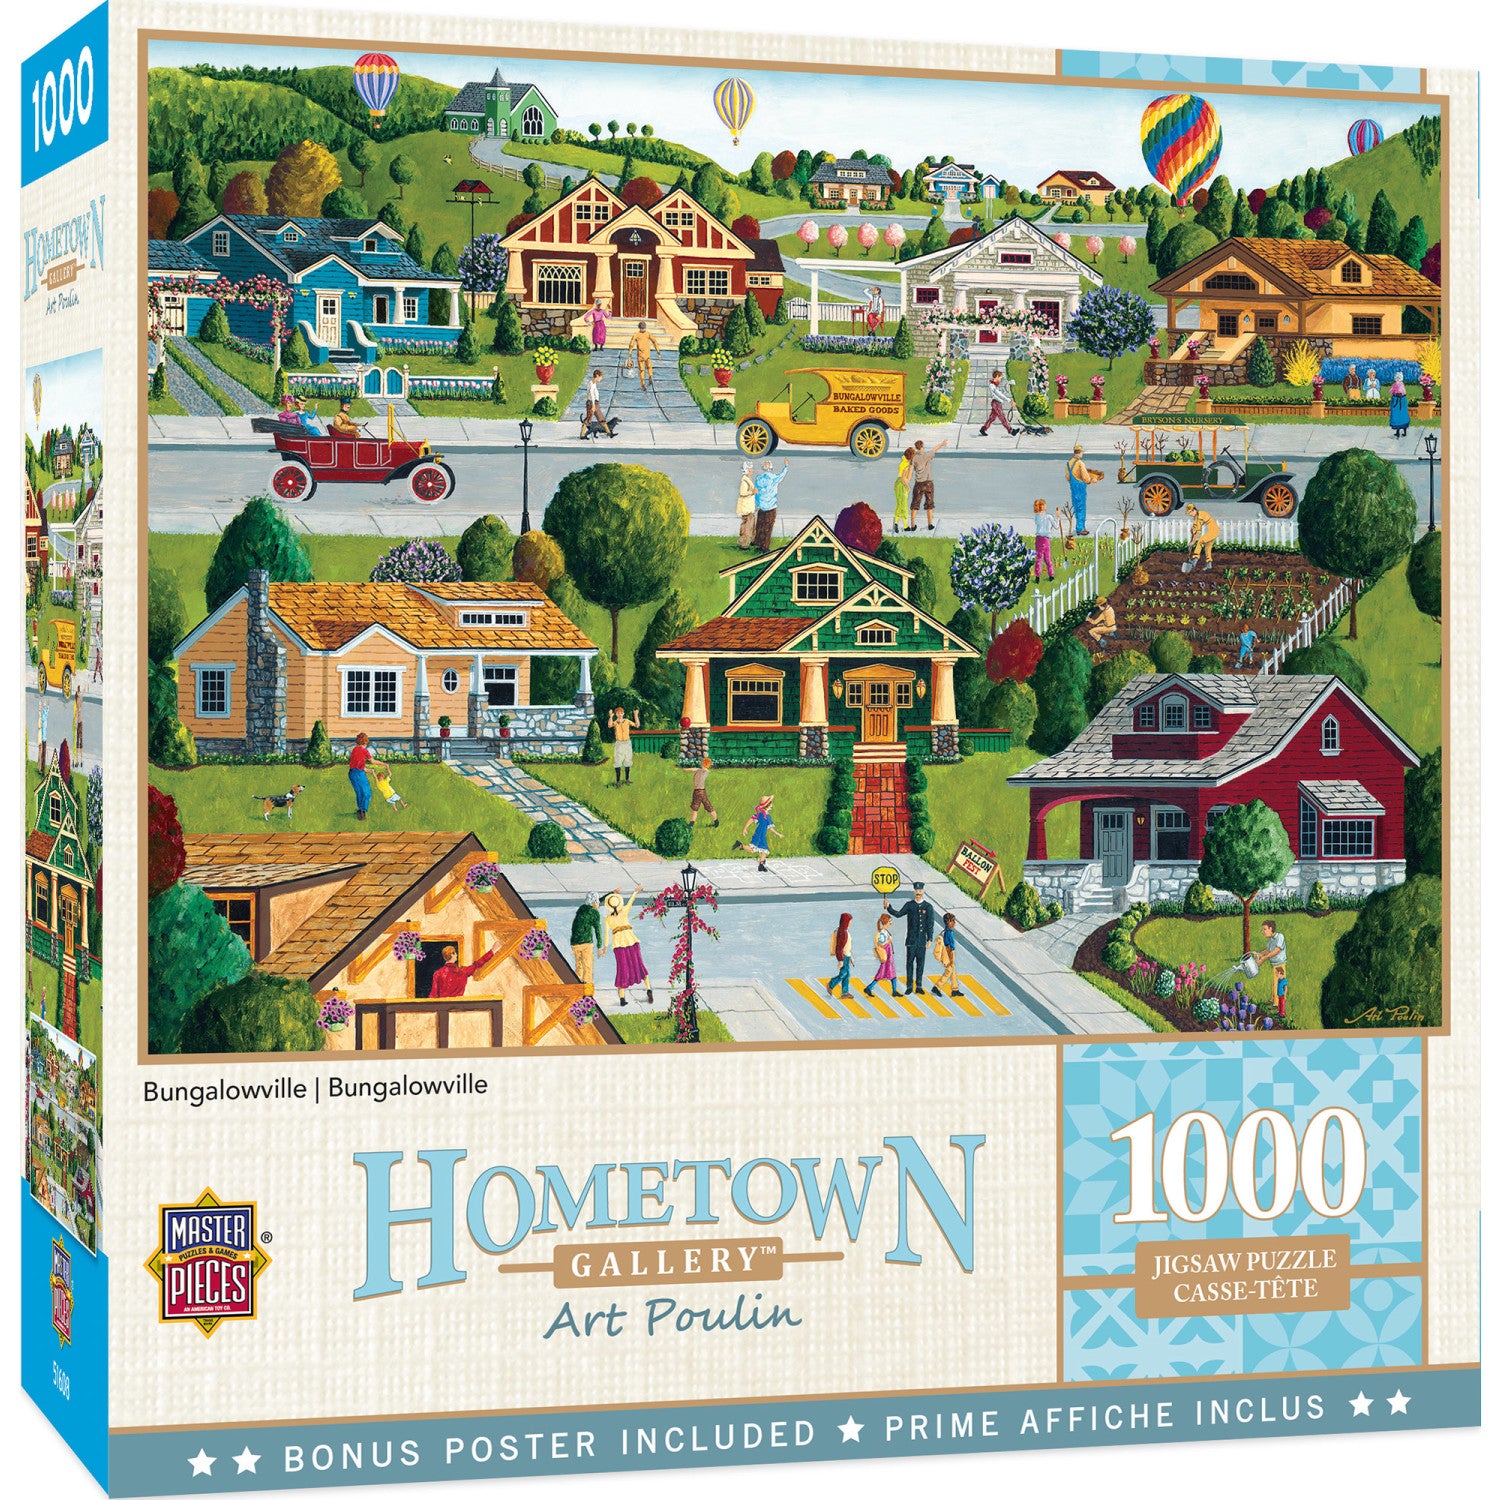 5000 & Up Pieces Puzzles for sale